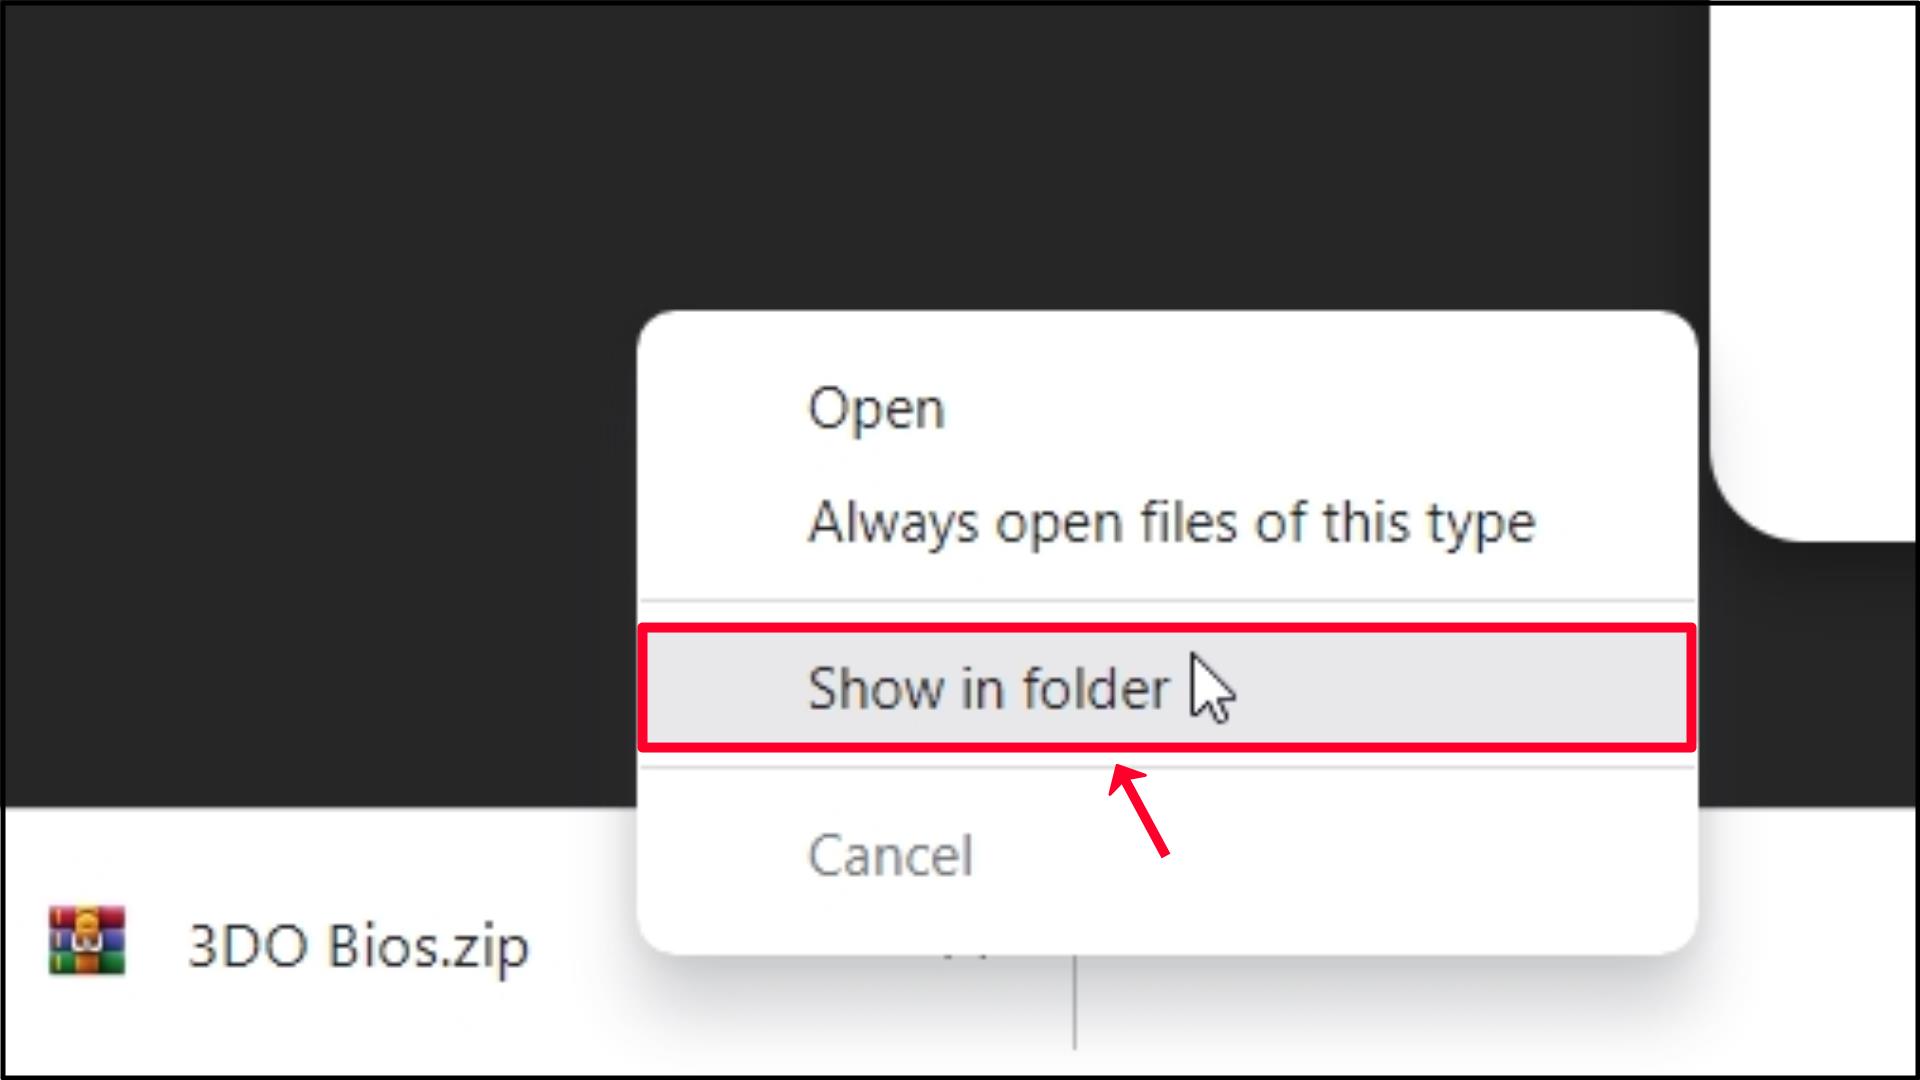 Step 1 Open BIOS.zip file by clicking on Show in folder option.